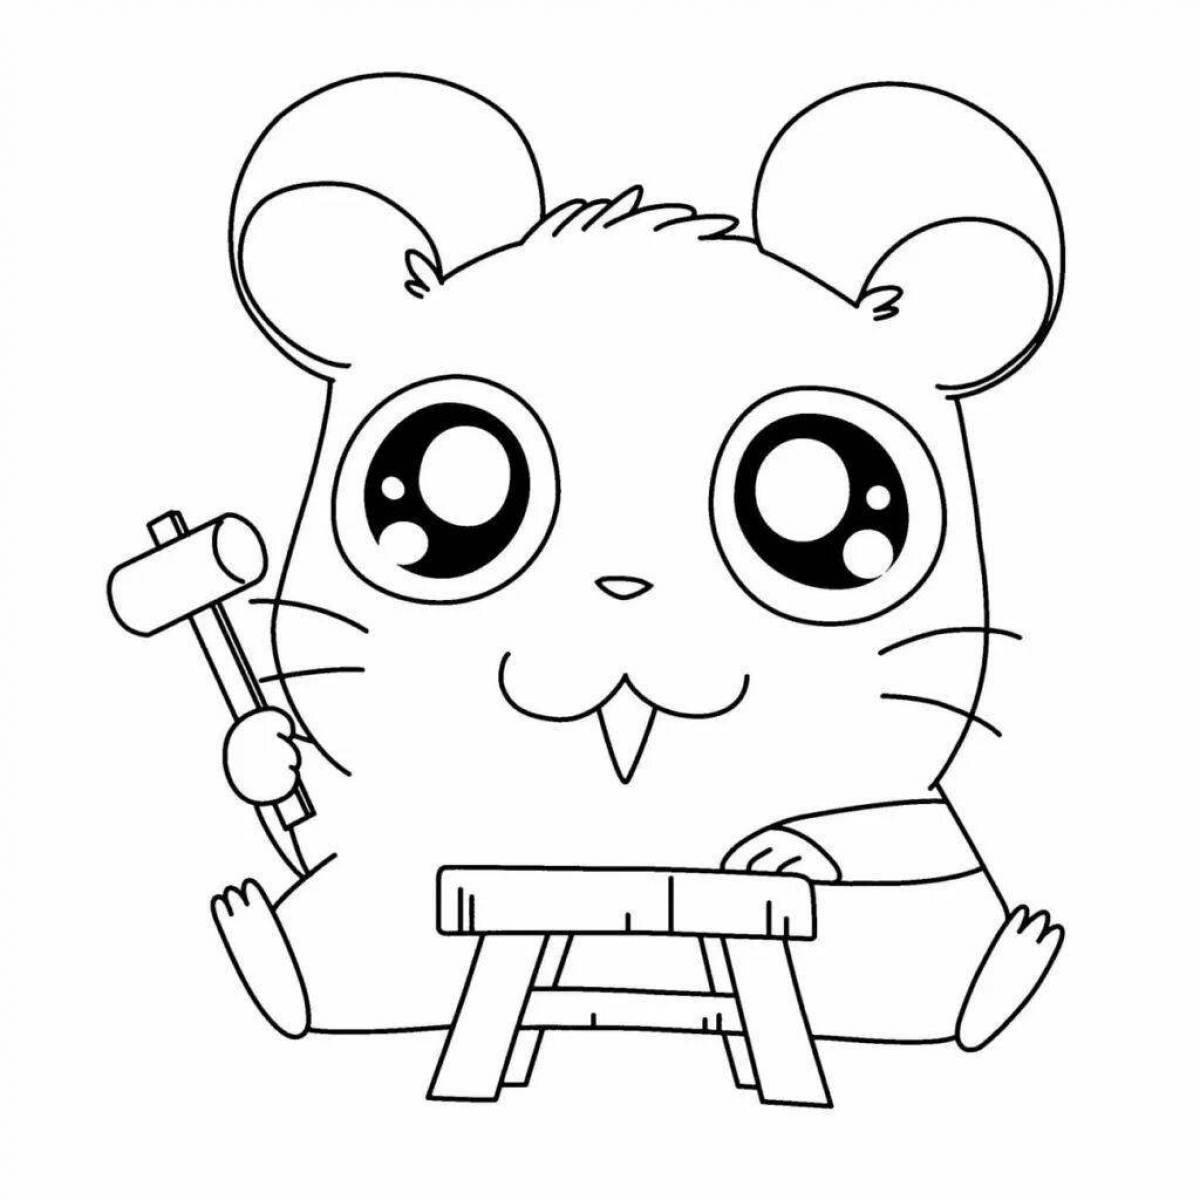 Wonderful hamster coloring pages